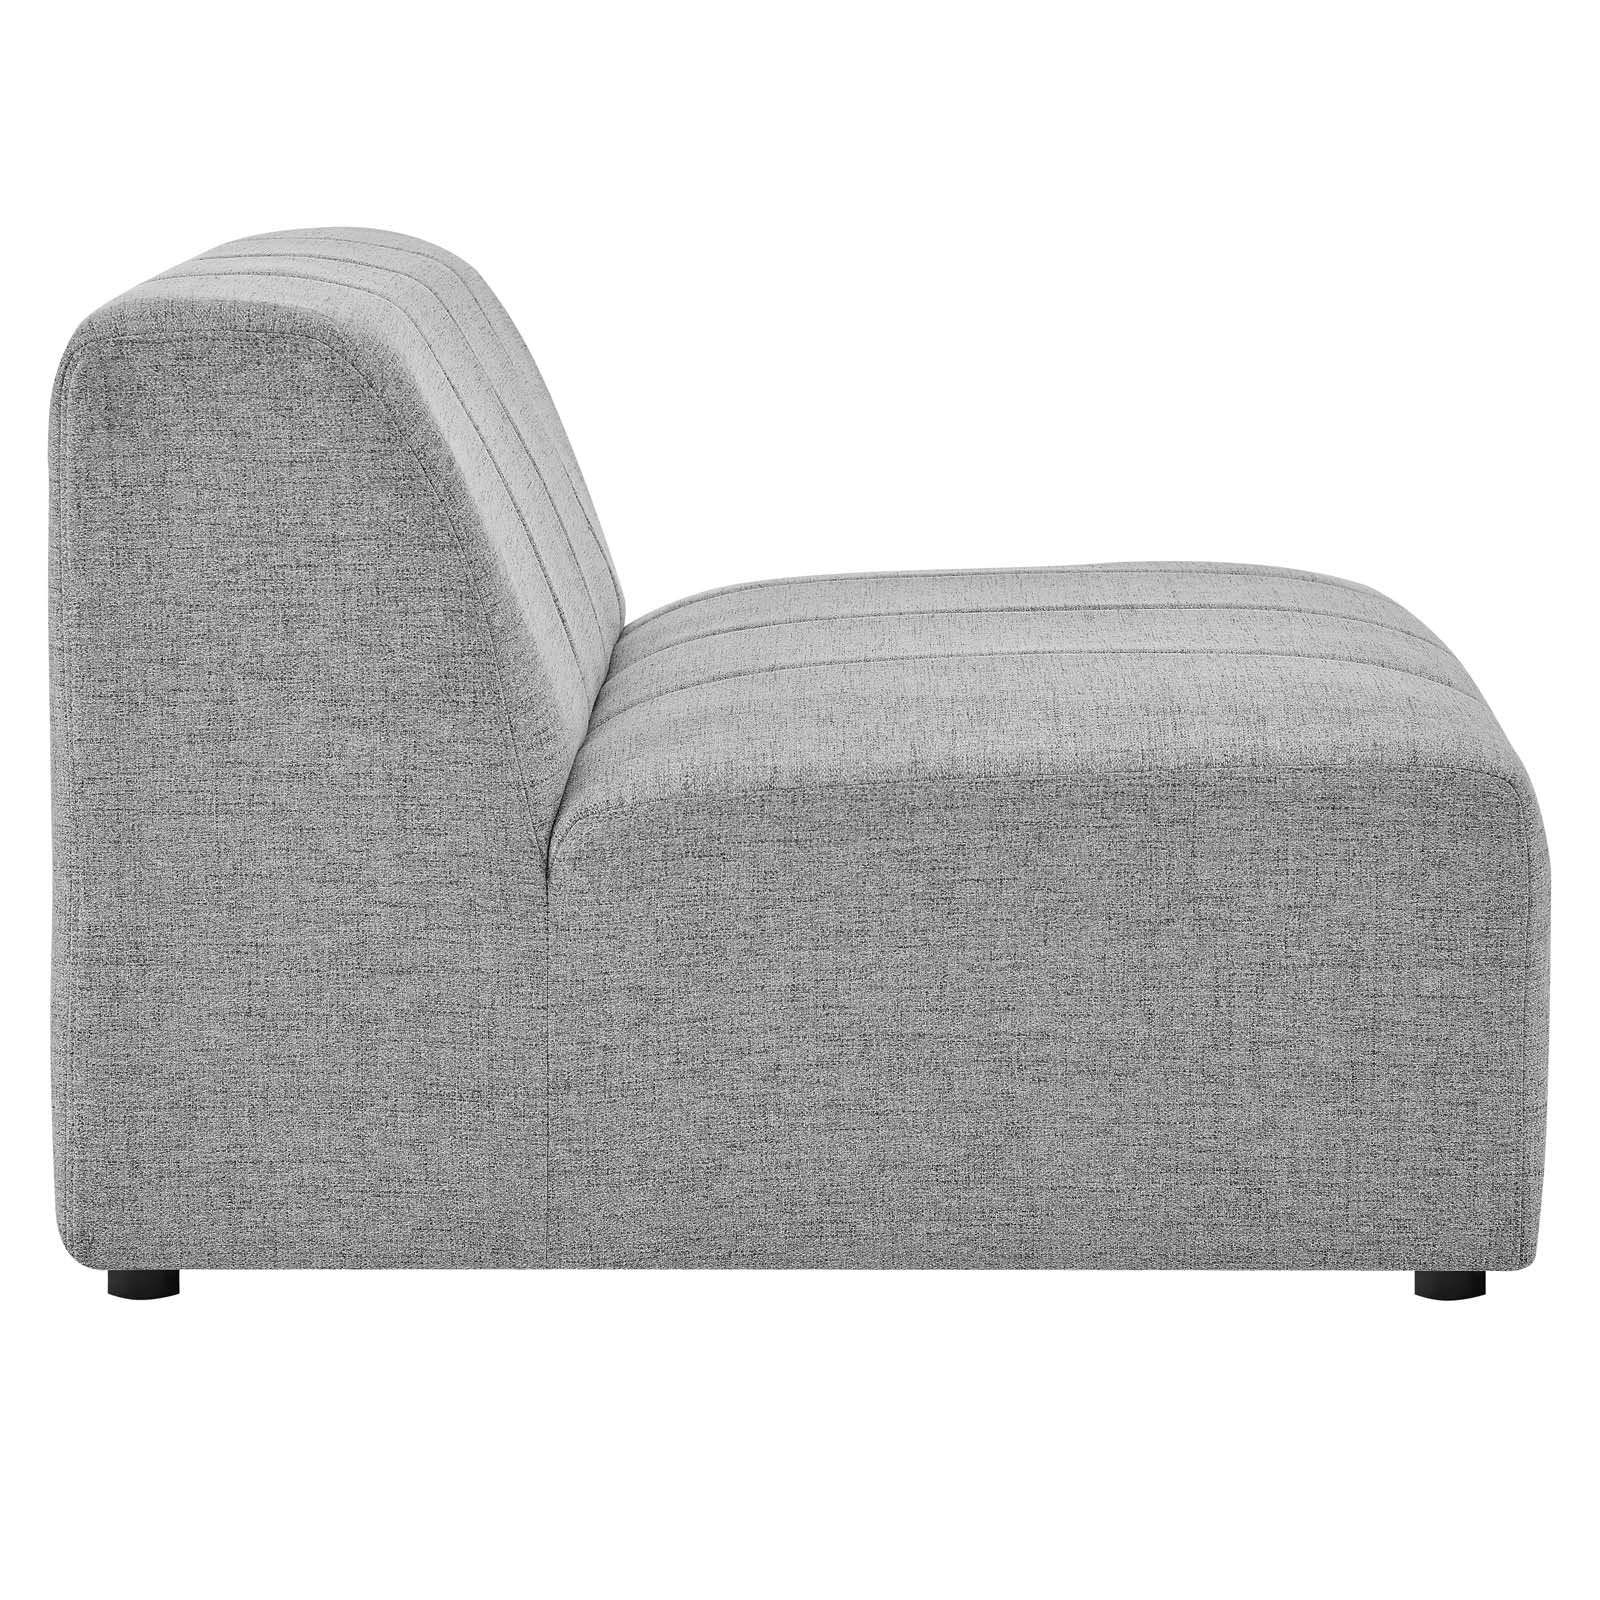 Bartlett Upholstered Fabric Upholstered Fabric 5-Piece Sectional Sofa - East Shore Modern Home Furnishings